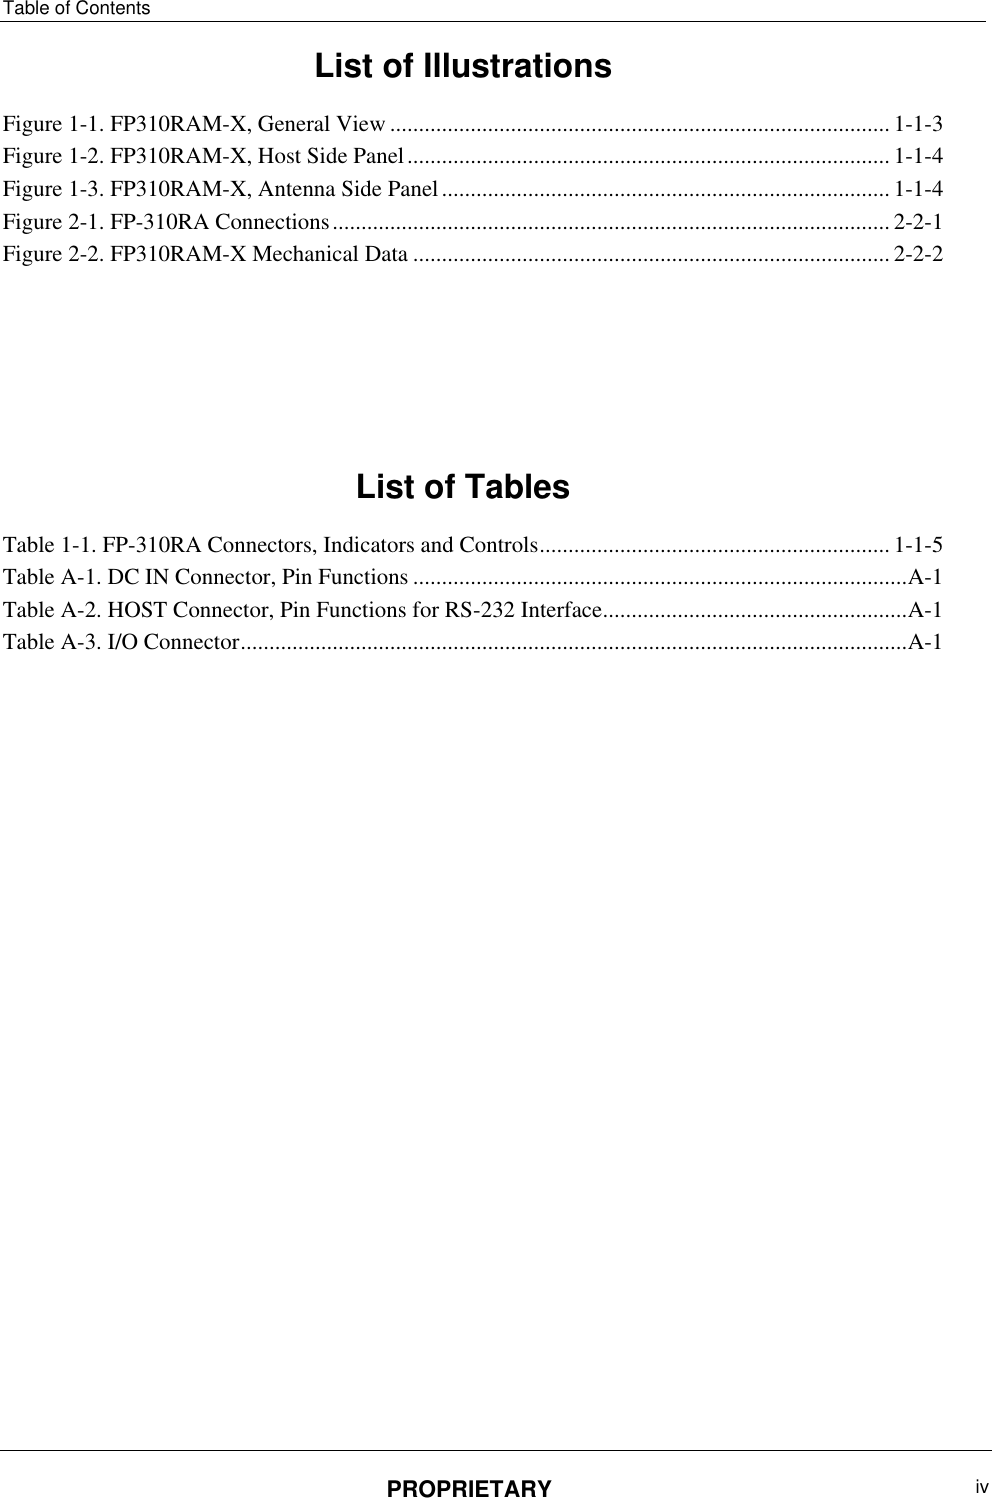 Table of Contents PROPRIETARY  iv   List of Illustrations Figure ‎1-1. FP310RAM-X, General View ....................................................................................... 1-1-3 Figure ‎1-2. FP310RAM-X, Host Side Panel .................................................................................... 1-1-4 Figure ‎1-3. FP310RAM-X, Antenna Side Panel .............................................................................. 1-1-4 Figure ‎2-1. FP-310RA Connections ................................................................................................. 2-2-1 Figure ‎2-2. FP310RAM-X Mechanical Data ................................................................................... 2-2-2      List of Tables Table ‎1-1. FP-310RA Connectors, Indicators and Controls ............................................................. 1-1-5 Table ‎A-1. DC IN Connector, Pin Functions ...................................................................................... A-1 Table ‎A-2. HOST Connector, Pin Functions for RS-232 Interface ..................................................... A-1 Table ‎A-3. I/O Connector .................................................................................................................... A-1  